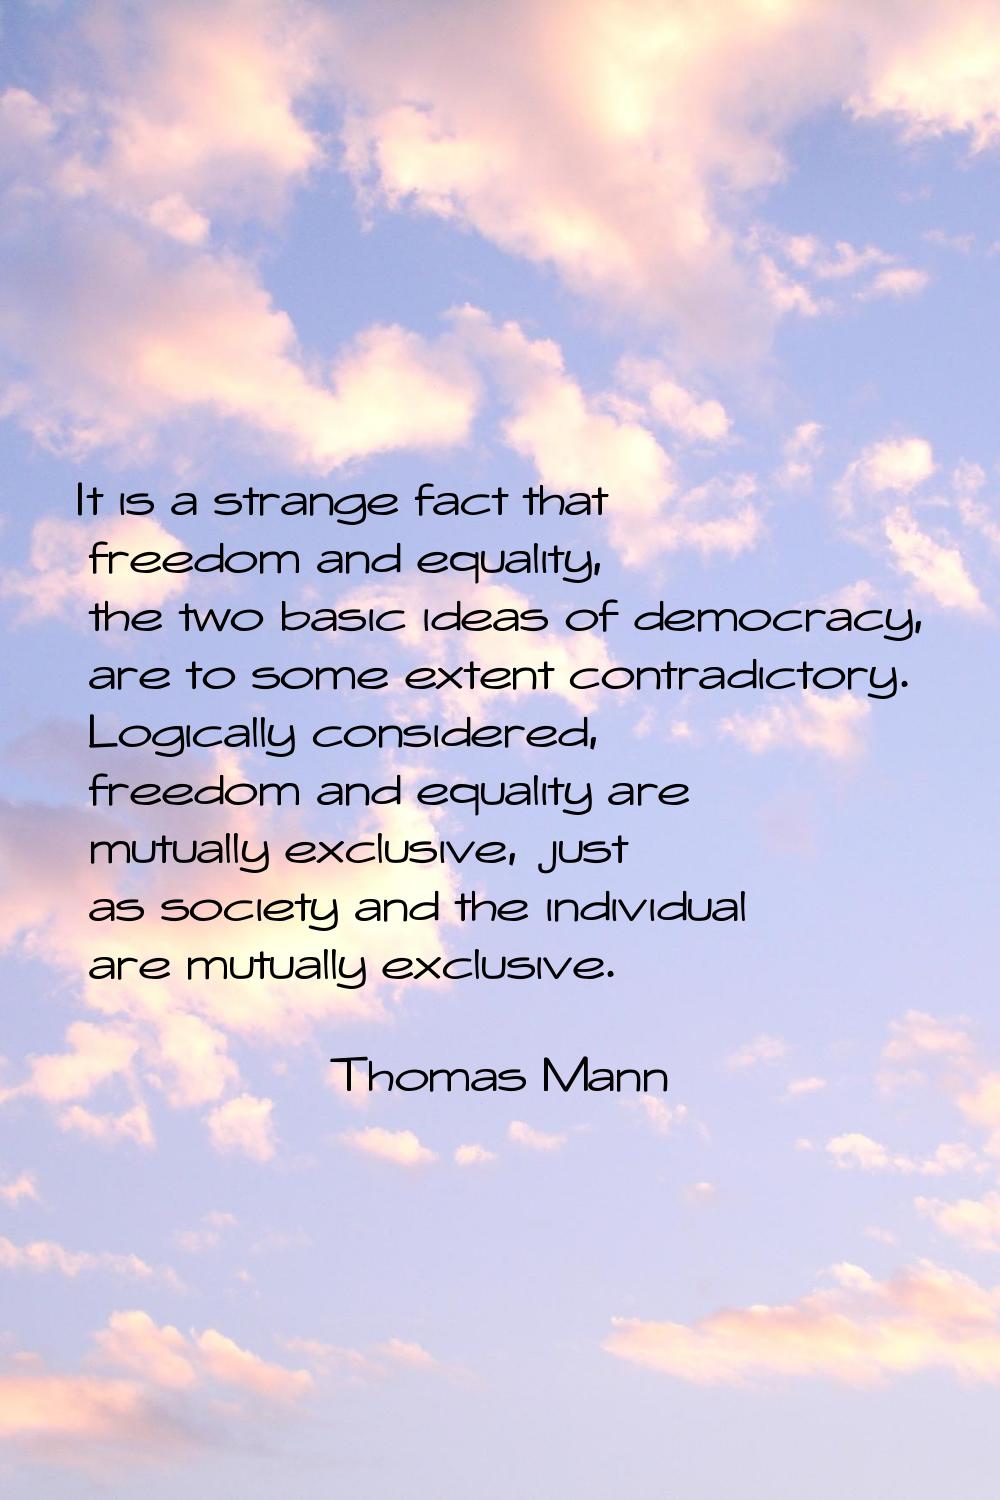 It is a strange fact that freedom and equality, the two basic ideas of democracy, are to some exten